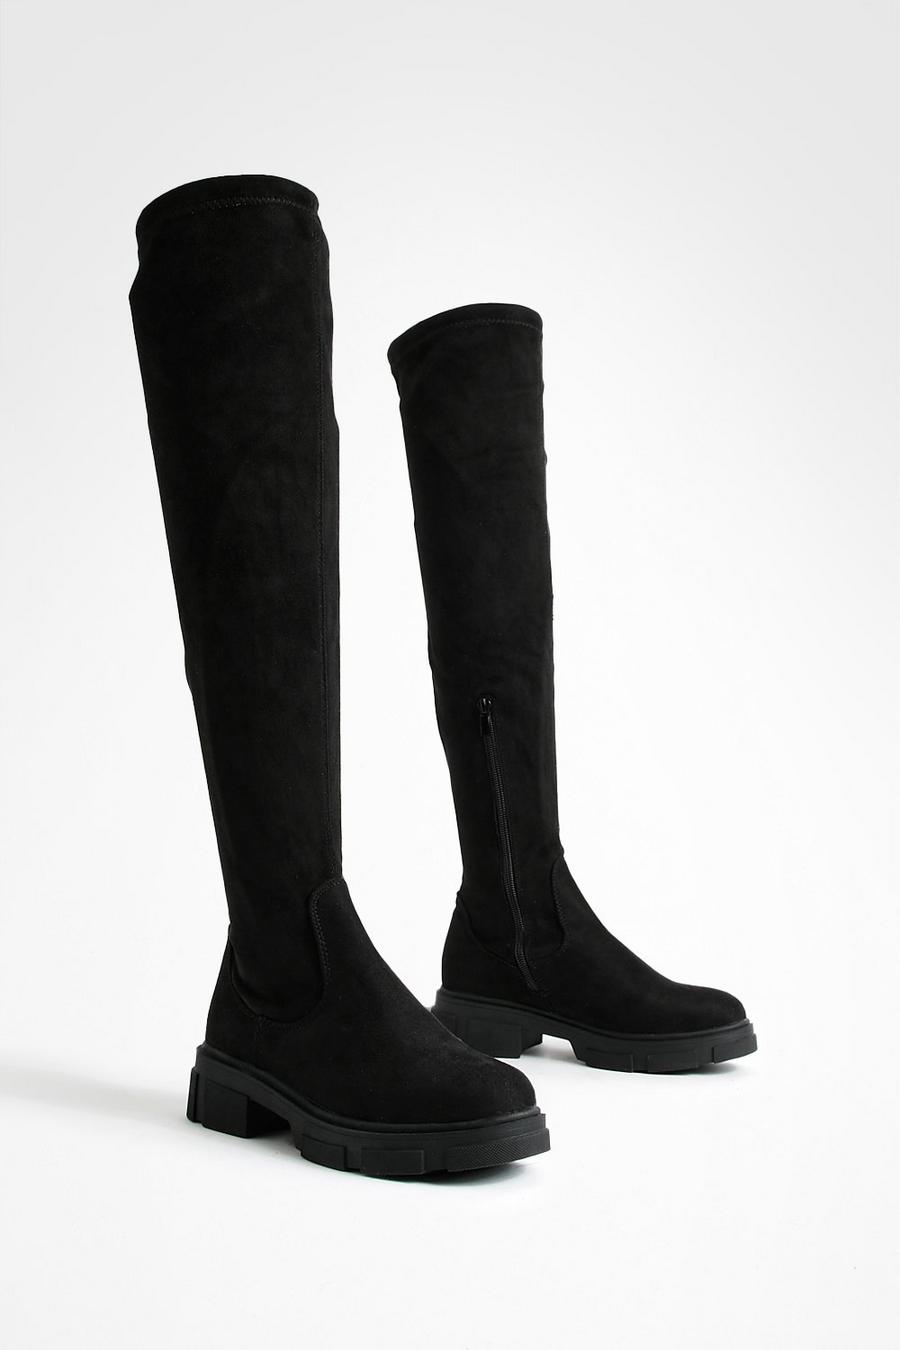 Black Stretch Knee High Boots